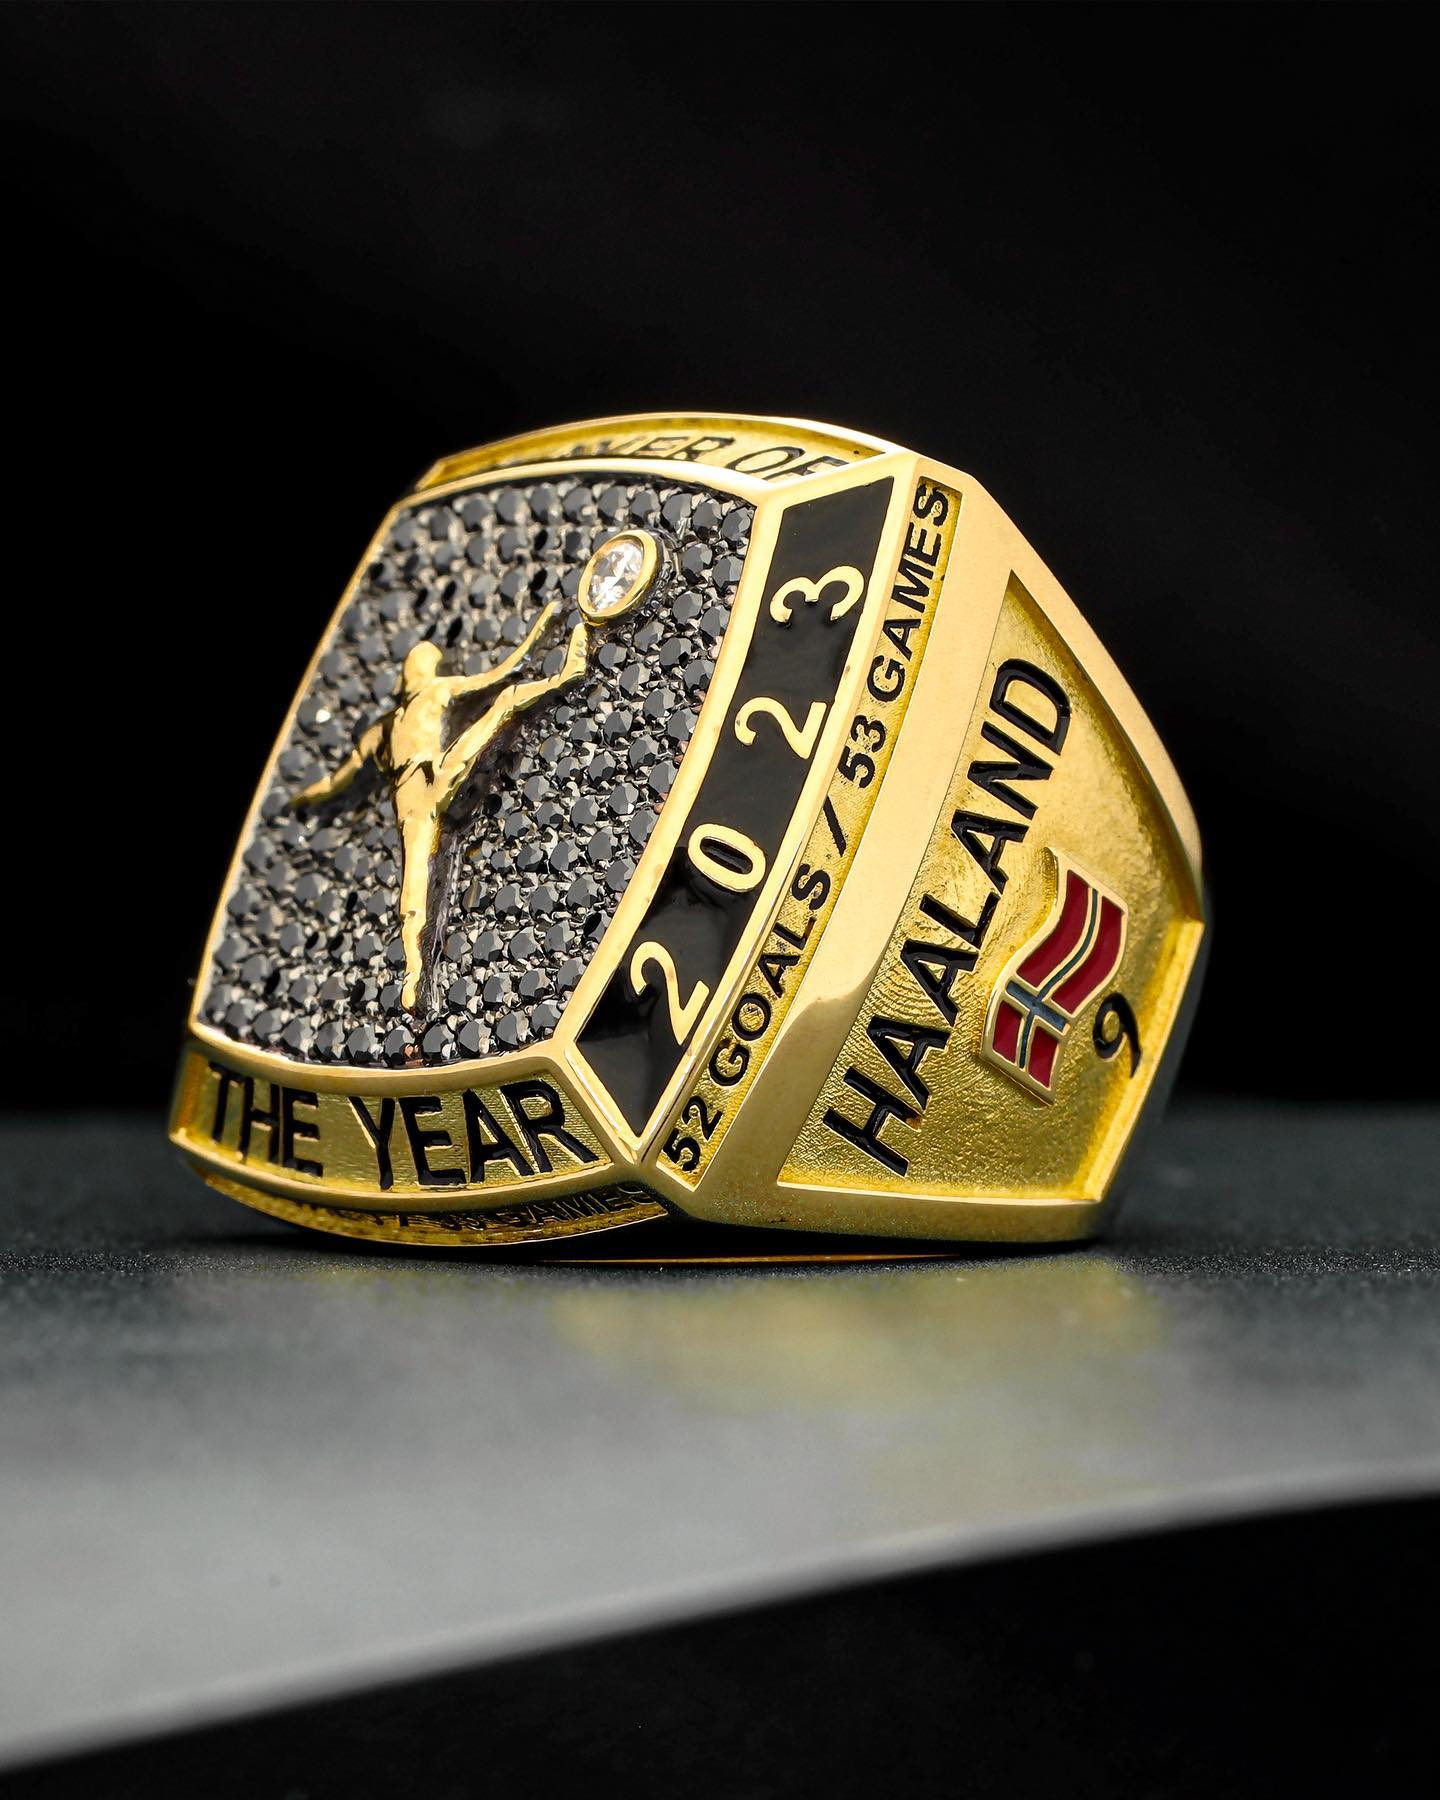 The ring features nods to his record-breaking season